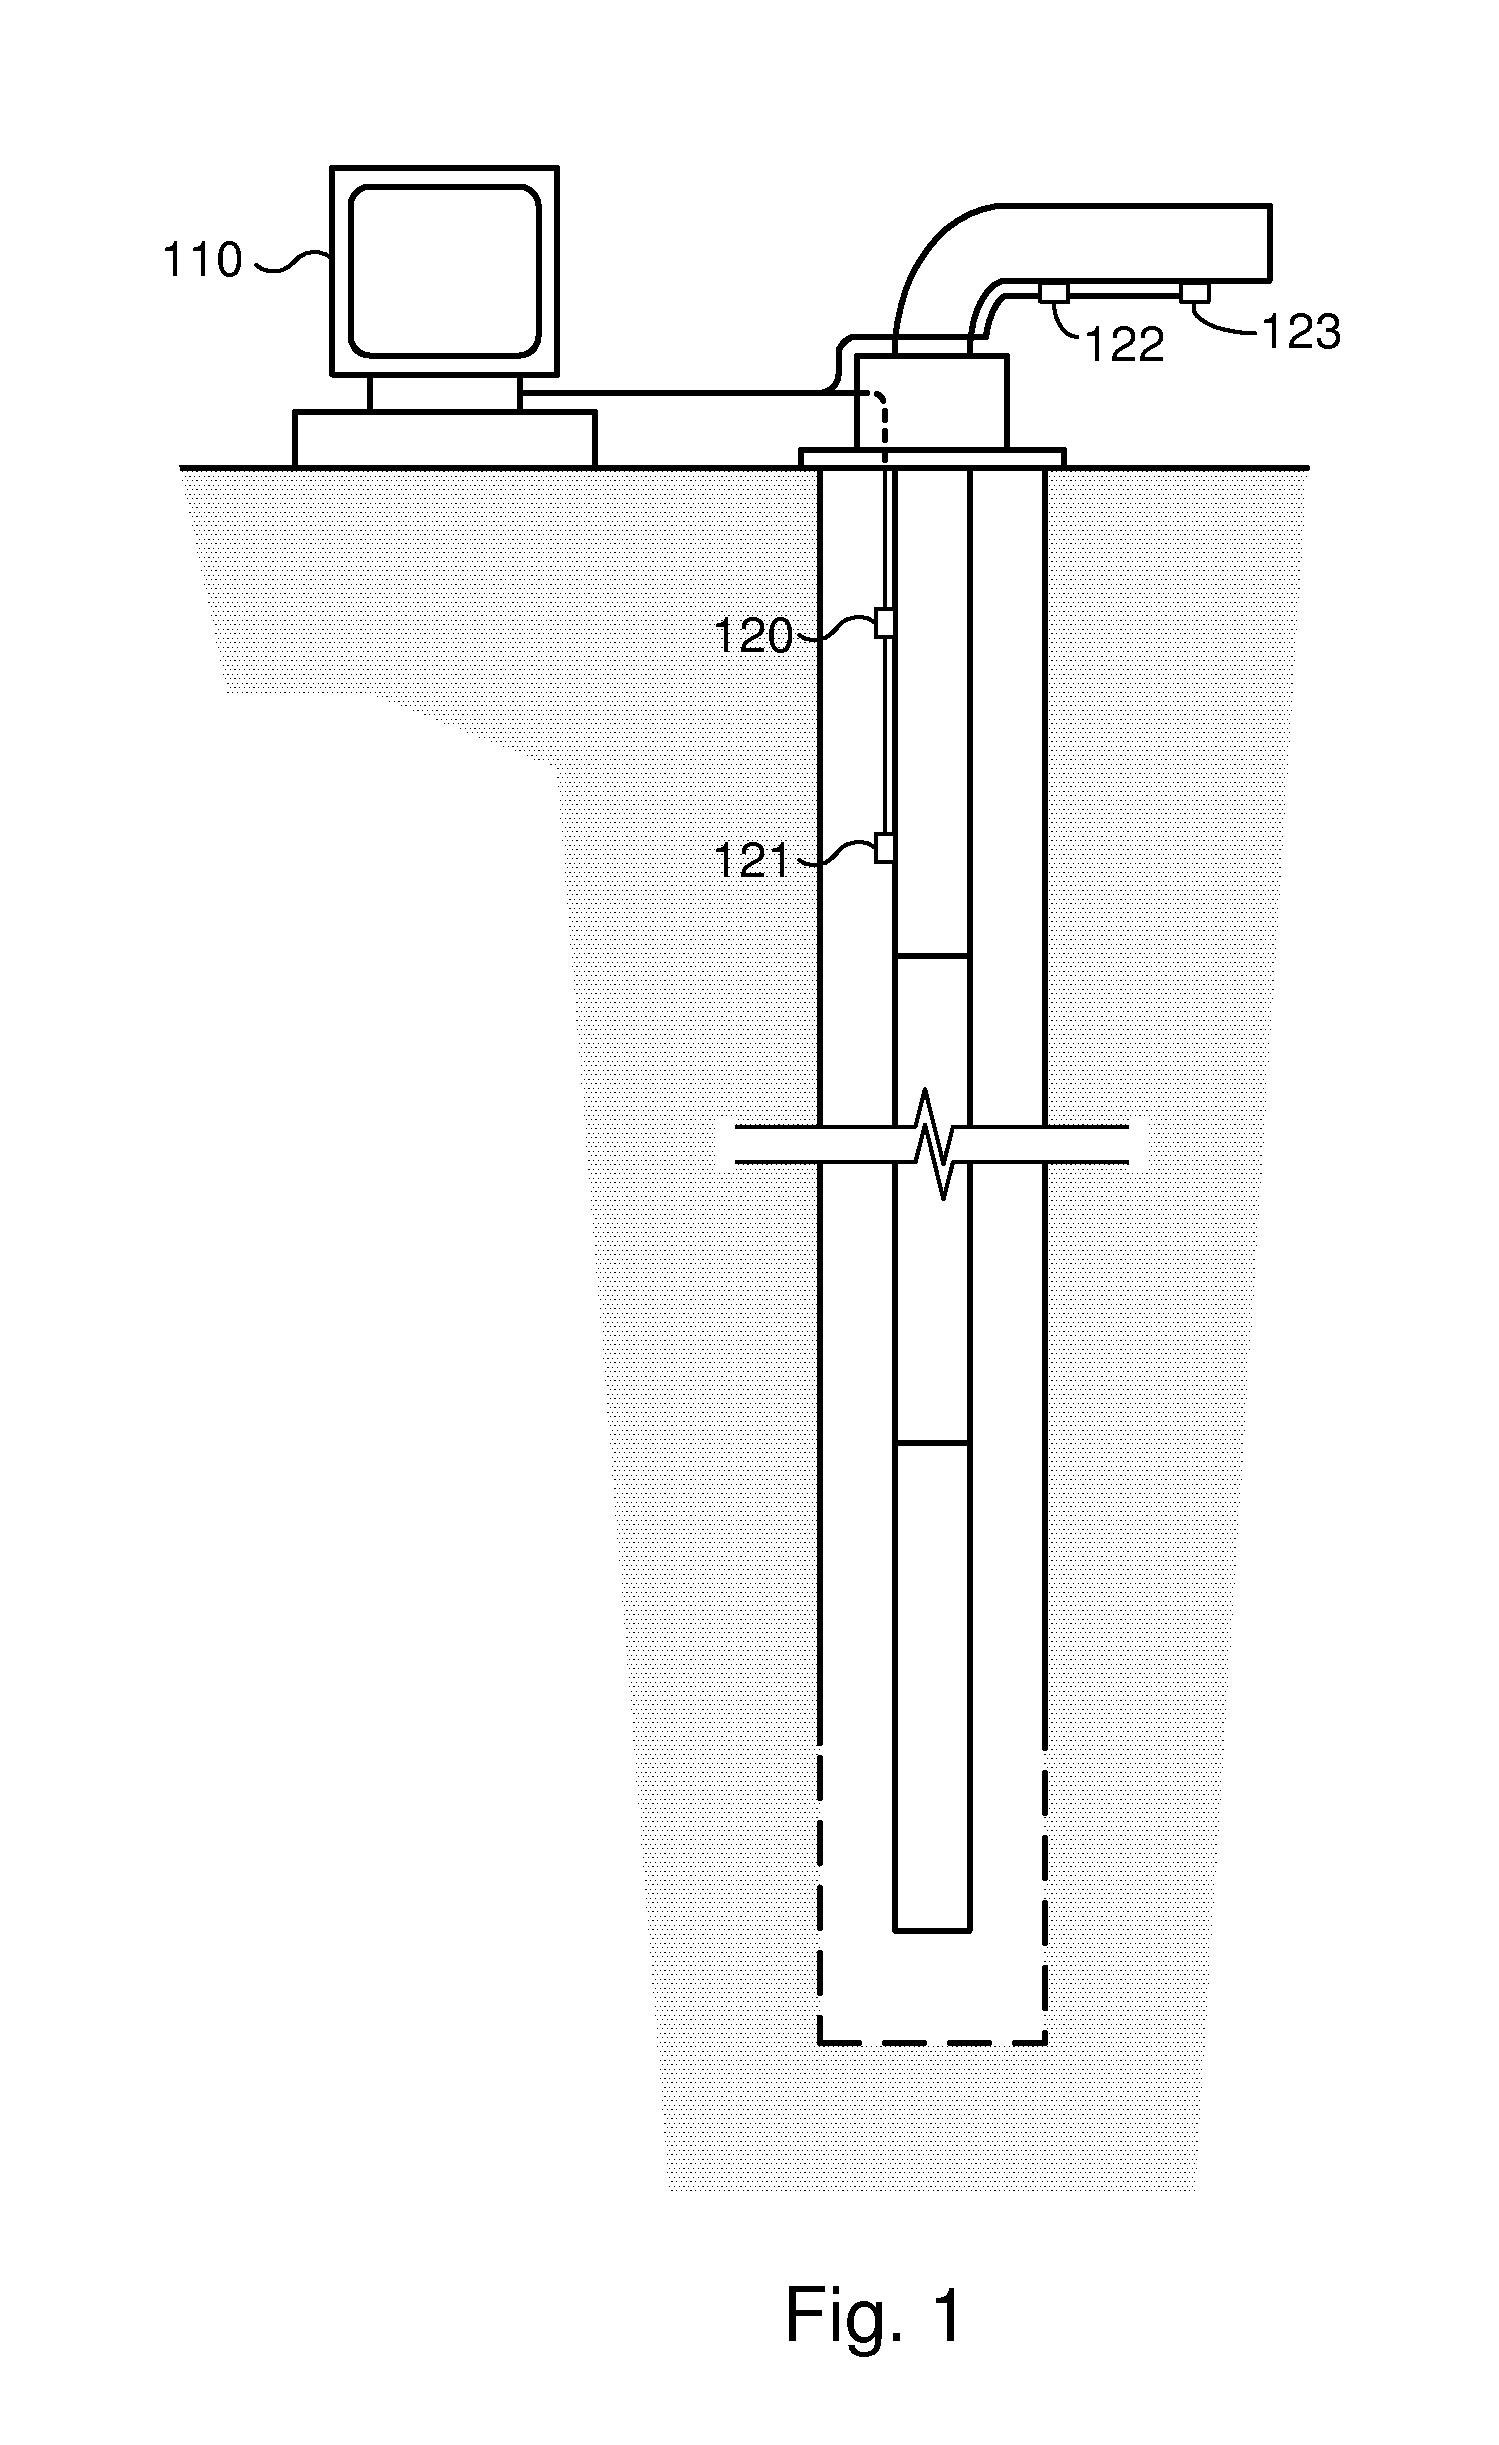 Systems and Methods for Analysis of Downhole Data